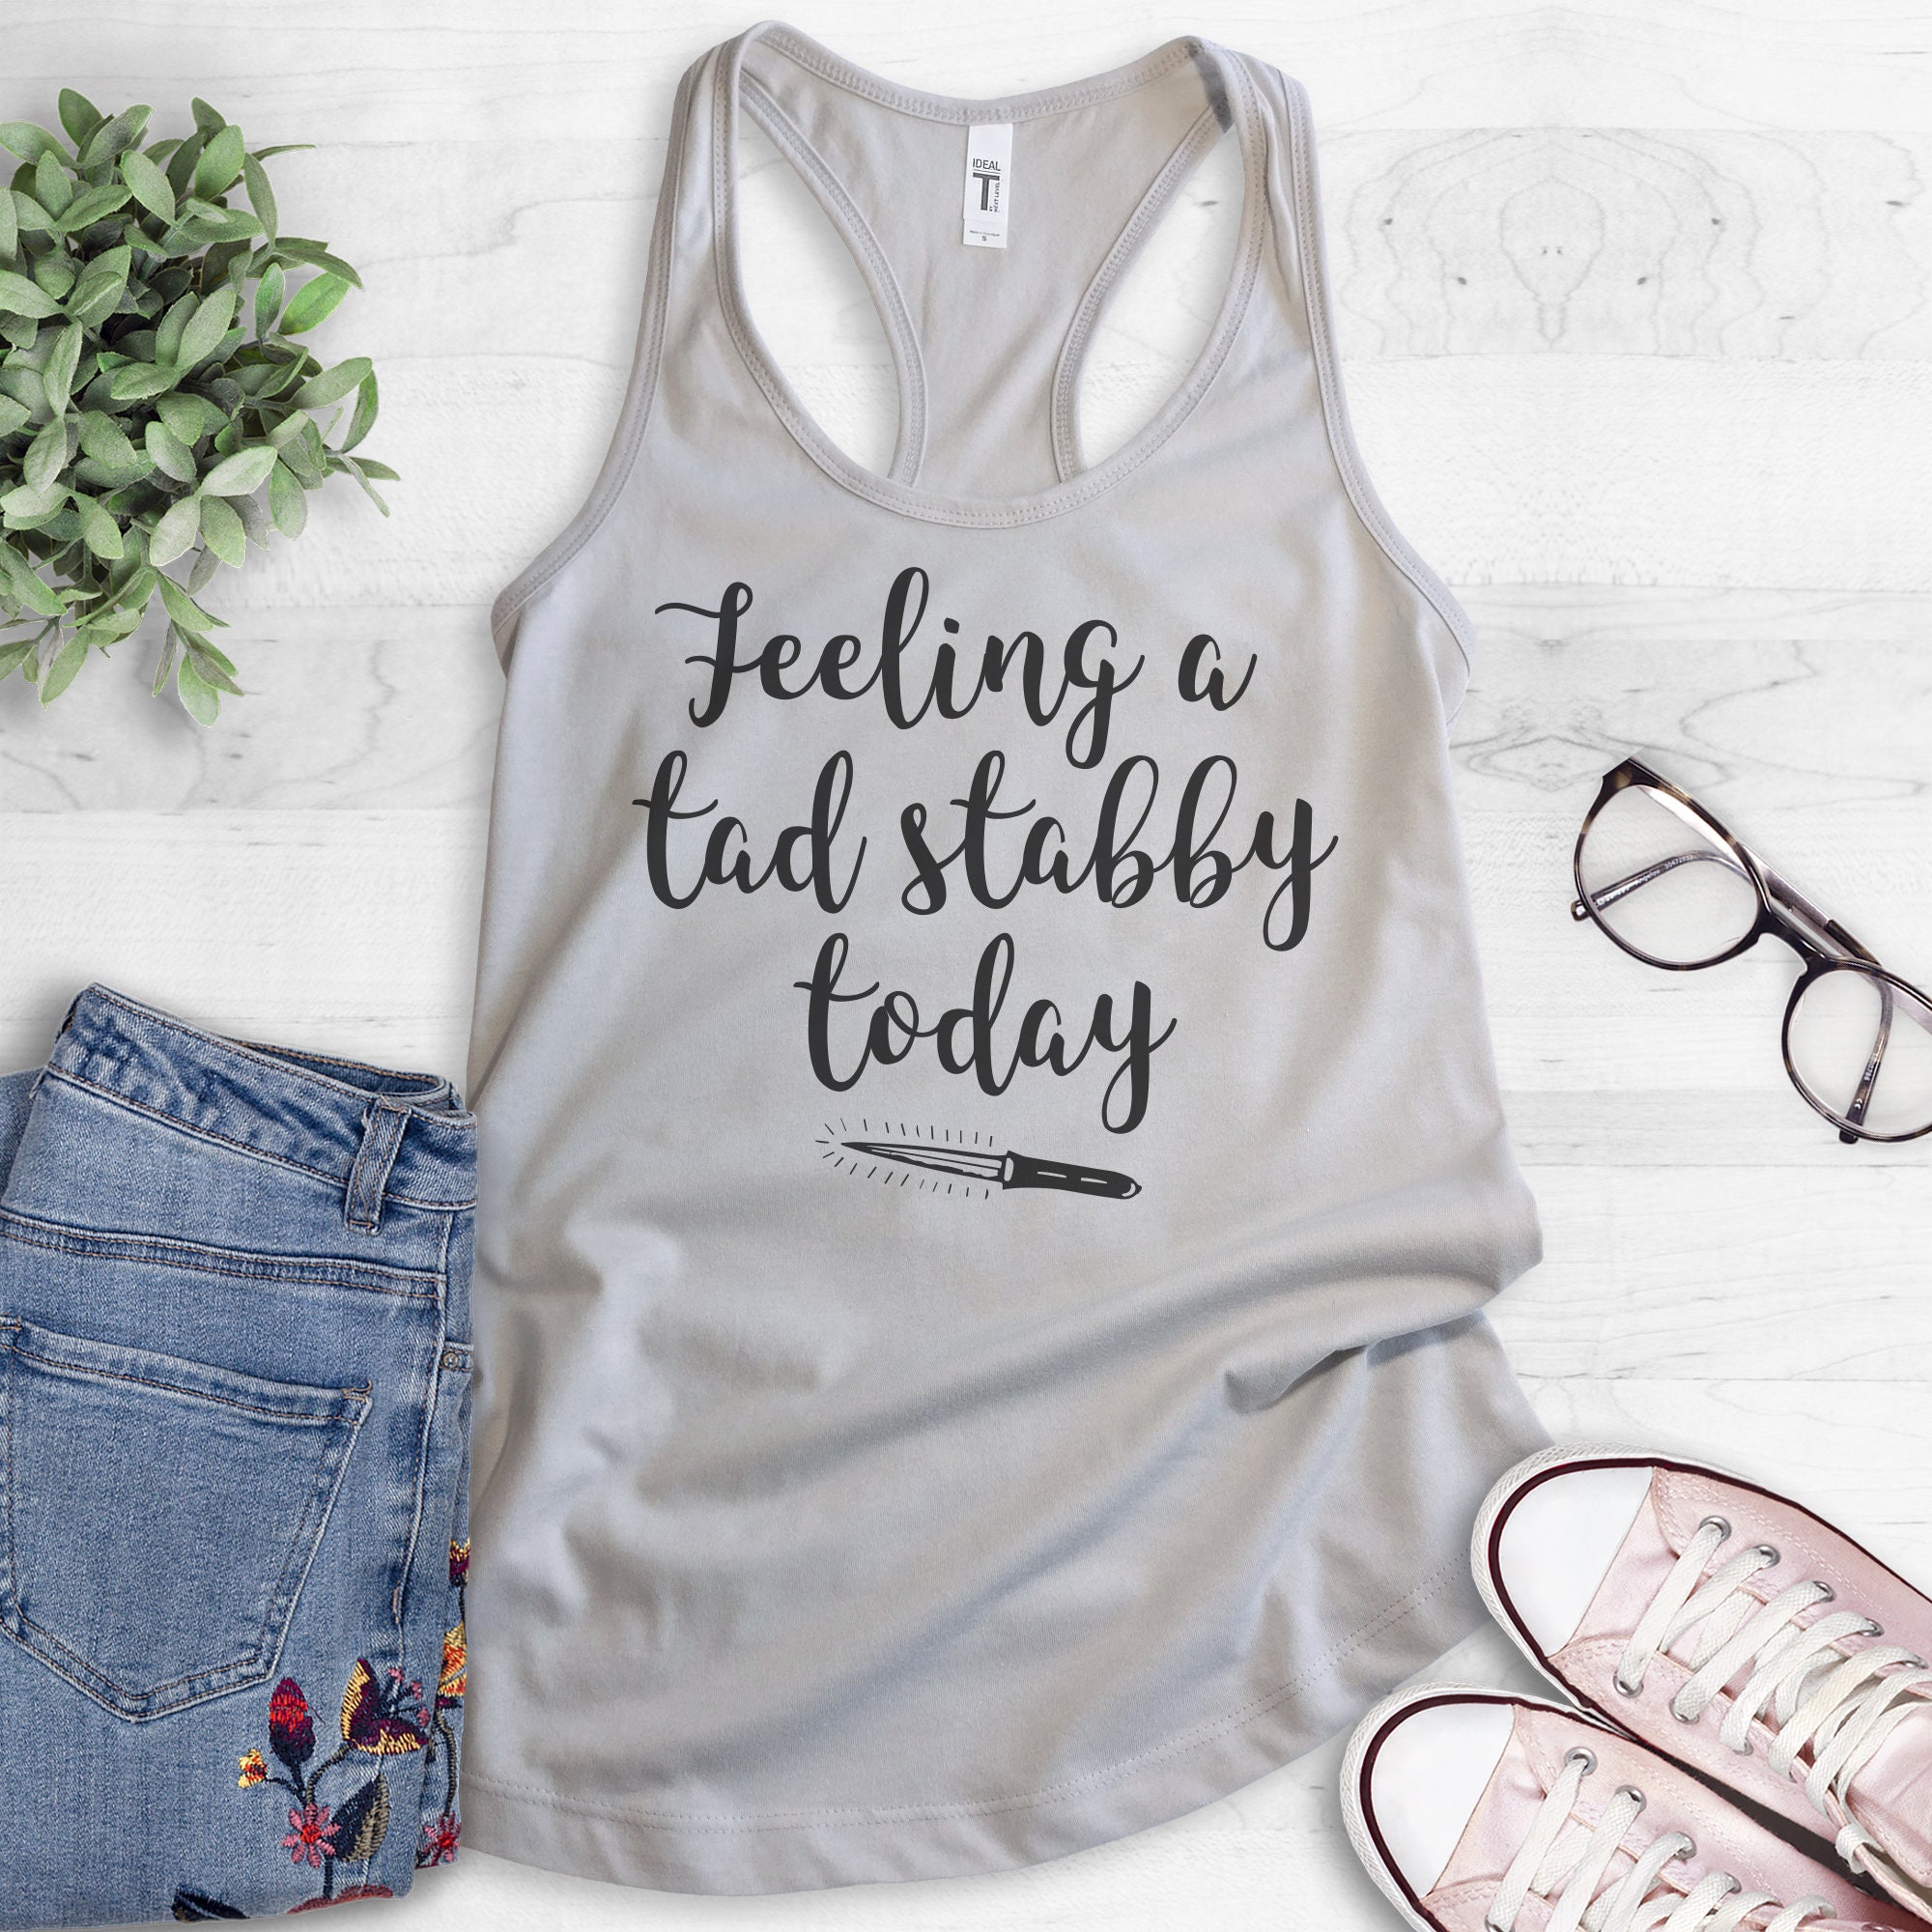 Feeling stabby today,yoga tank,workout tank,stabby,funny,workout tank top,gym tank,funny tank tops,feeling a tad stabby,funny tank top